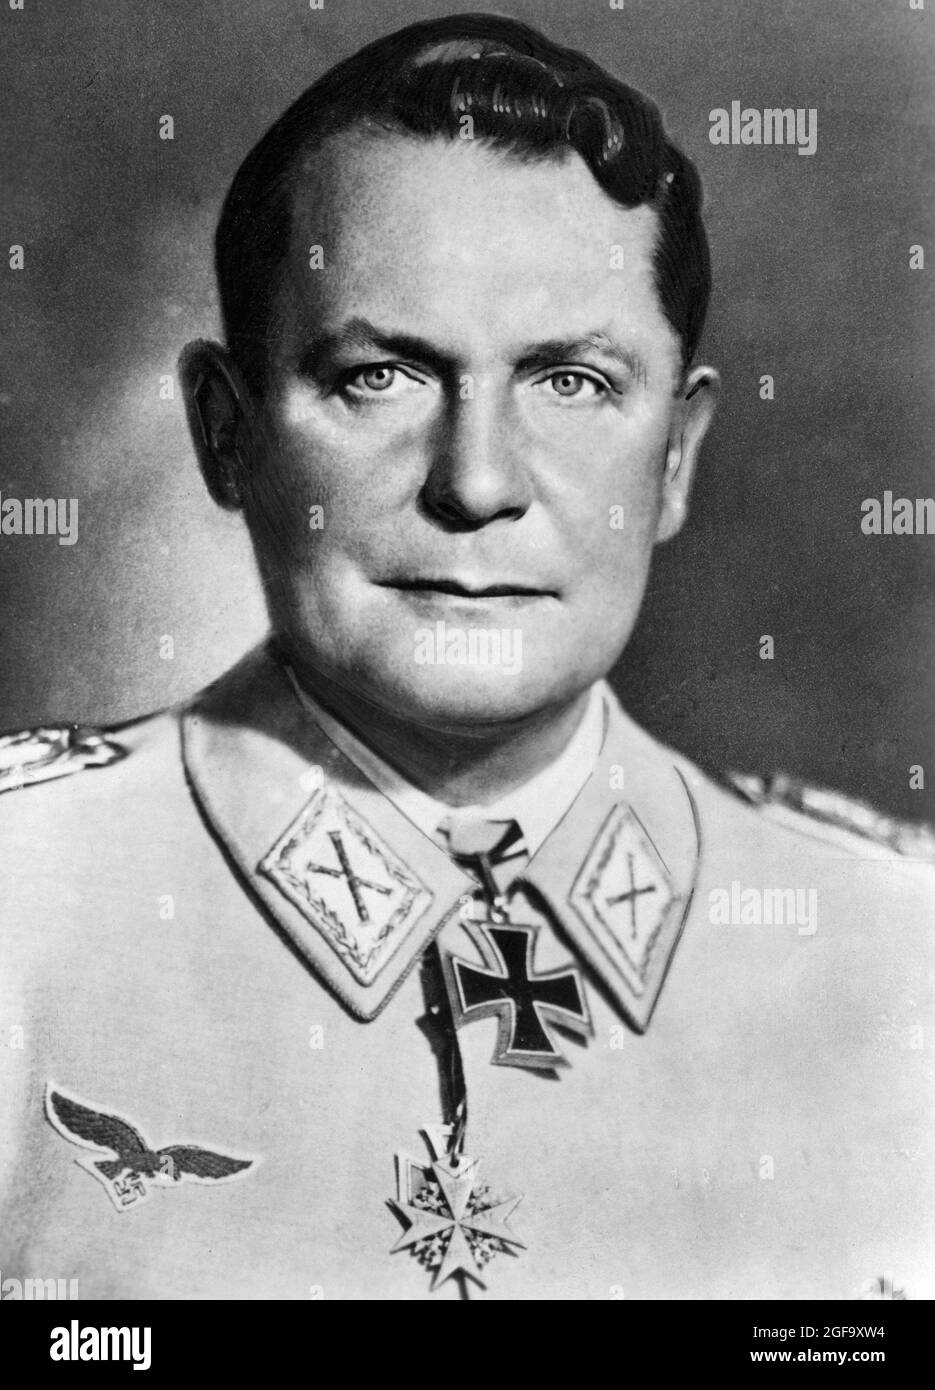 A 1945 portrait of Nazi head of the Luftwaffe Germann Göring. he was captured in 1945, tried and condemned to death at Nuremberg in 1946. He committed suicide hours before he was due to be hanged. Stock Photo